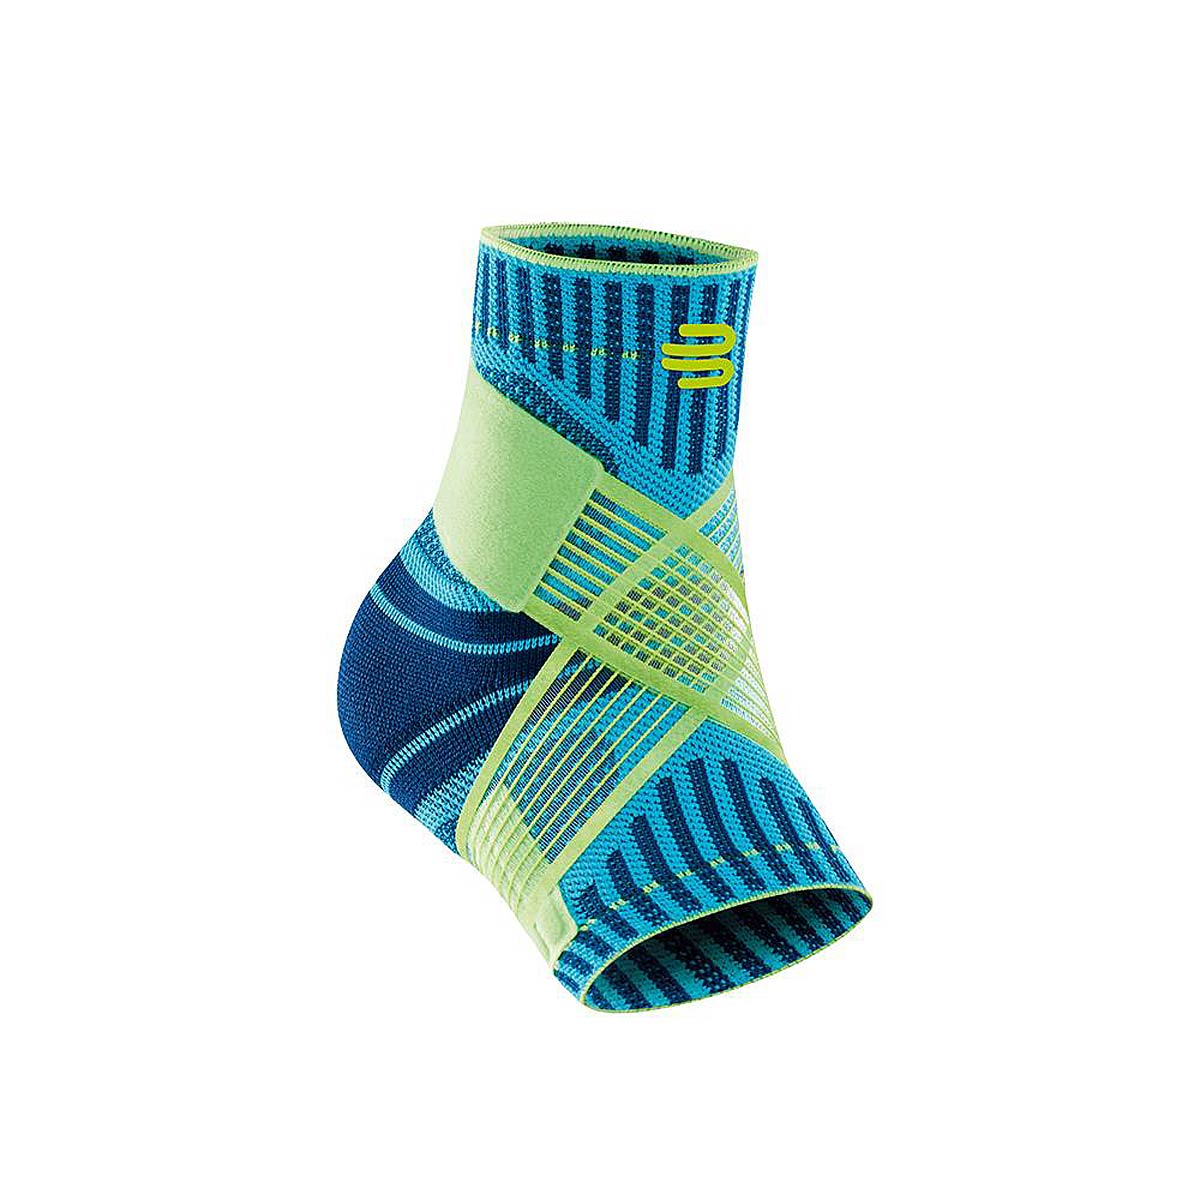 Image of Bauerfeind Sports Ankle Support Right, Green/blue